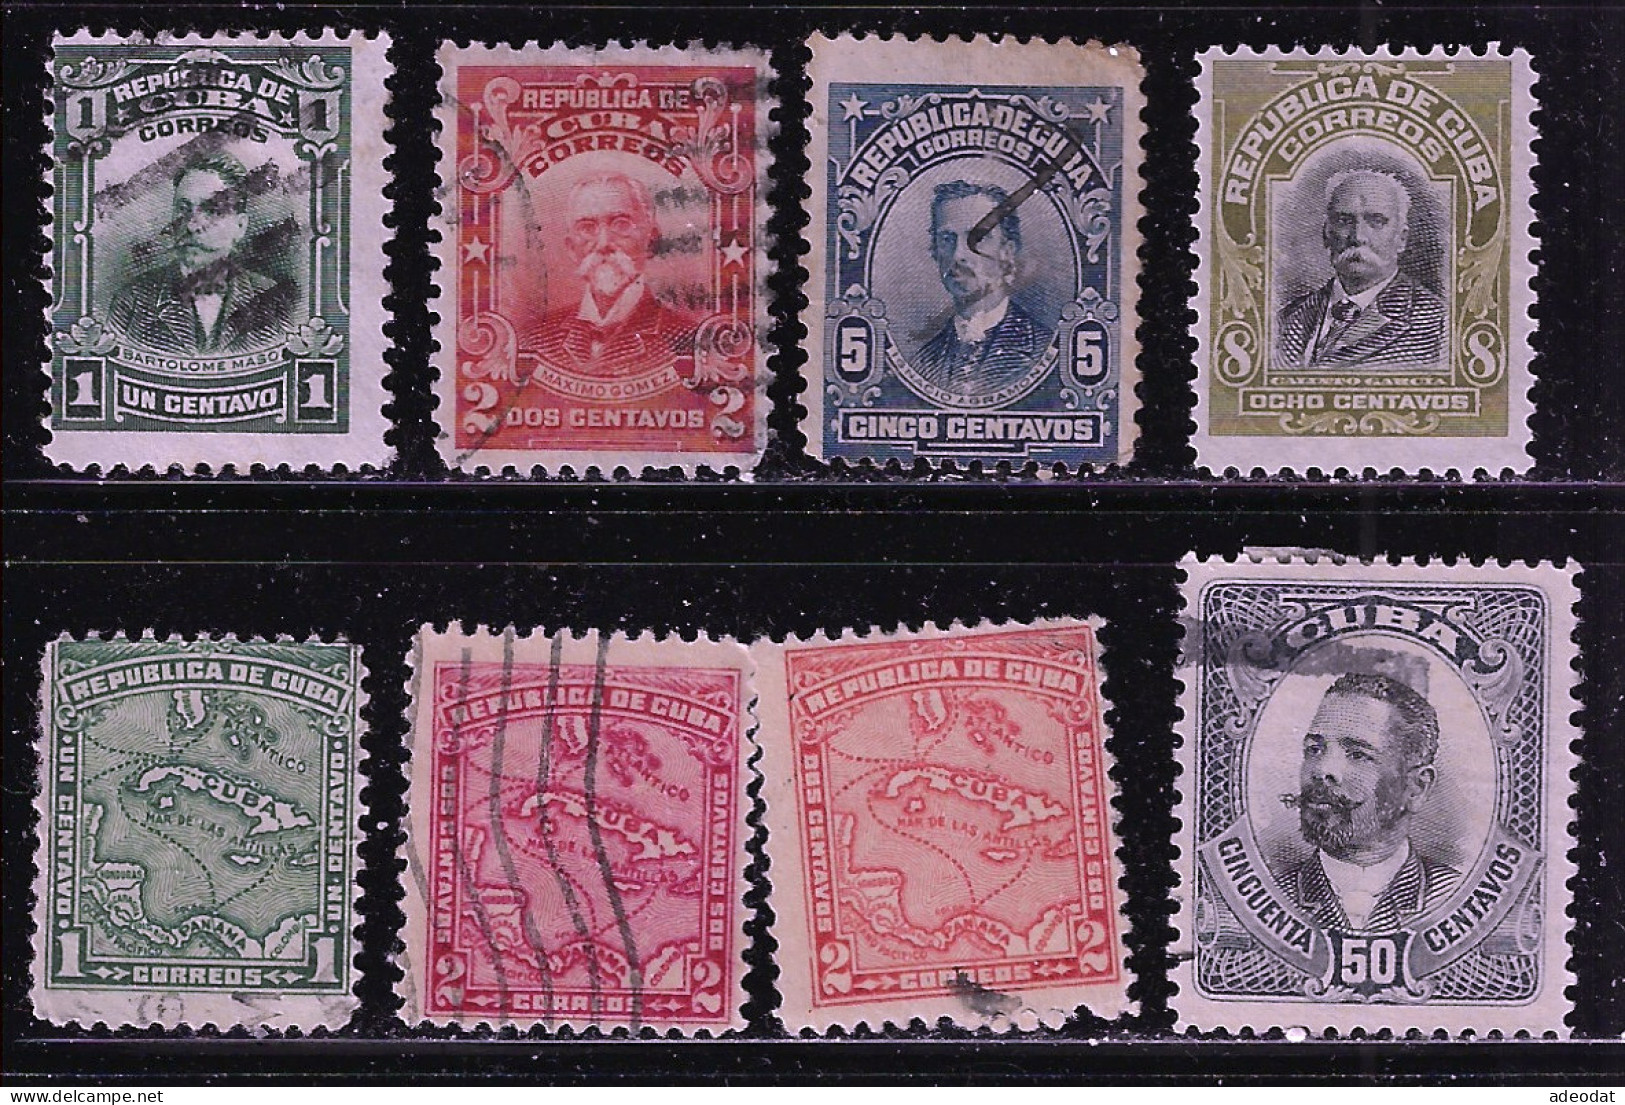 CUBA 1910-1917 SCOTT 239...270 CANCELLED - Used Stamps